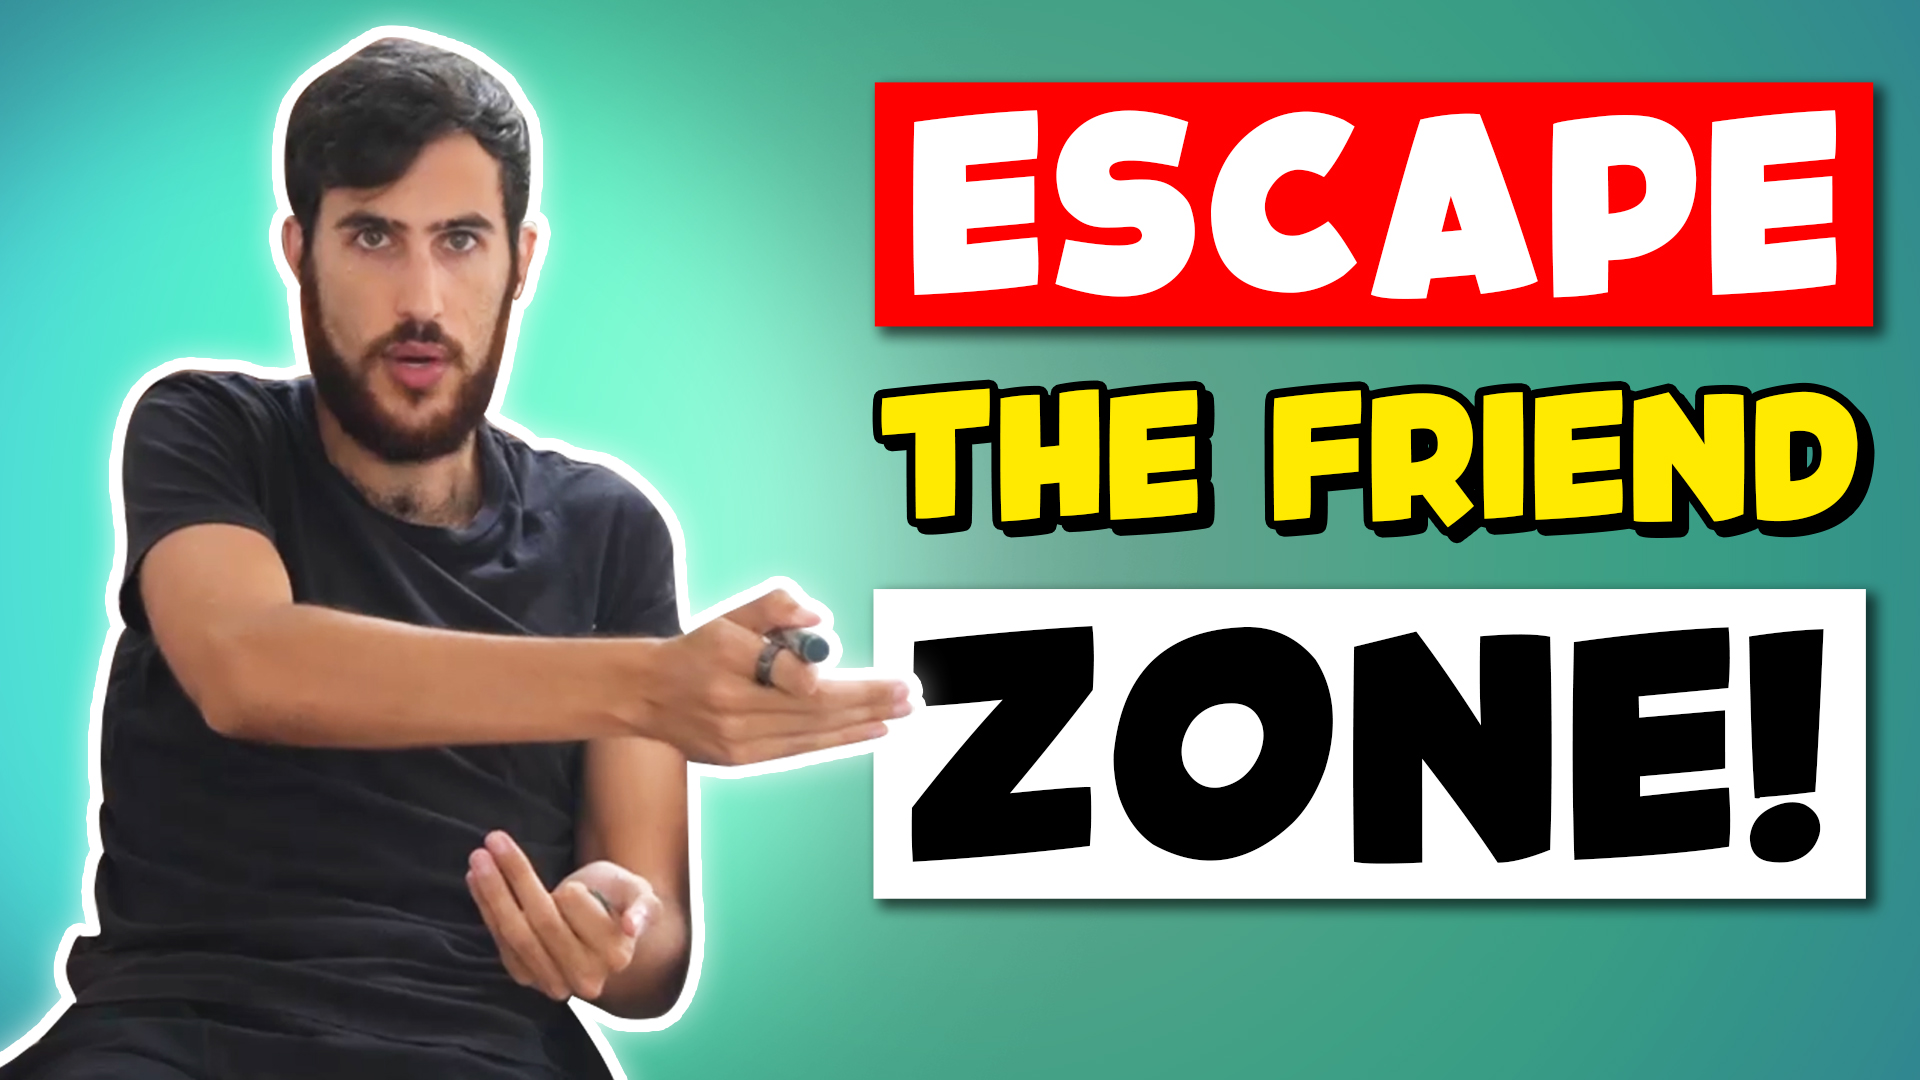 How To Escape The Friend Zone And Never Be Friend Zoned Ever Again [Proven Simple Strategies]